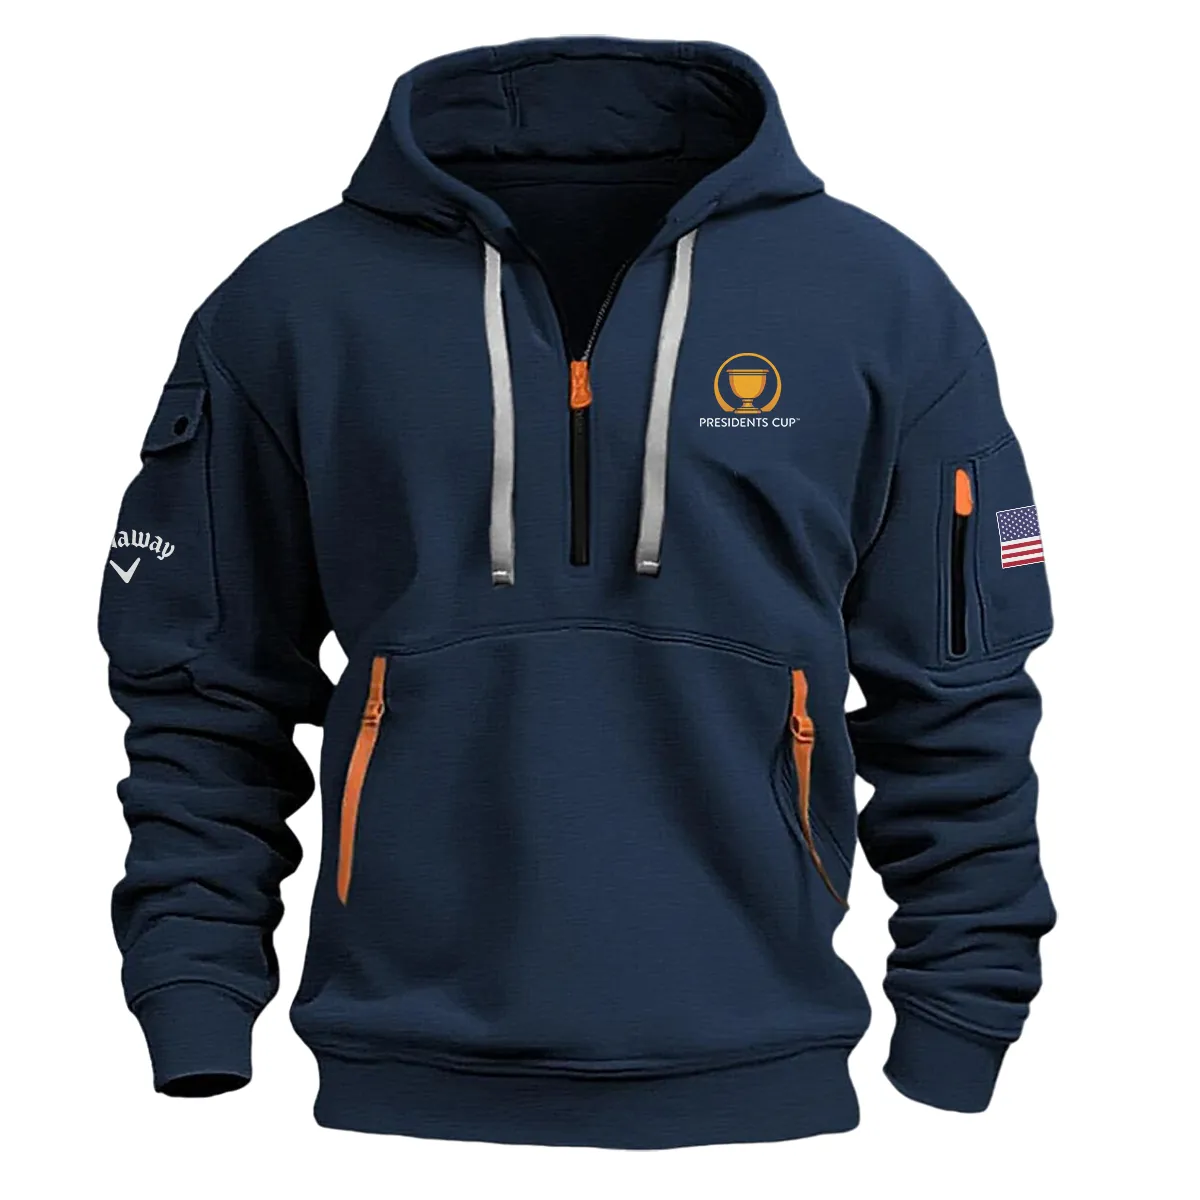 Navy Color Callaway Fashion Hoodie Half Zipper Presidents Cup Gift For Fans